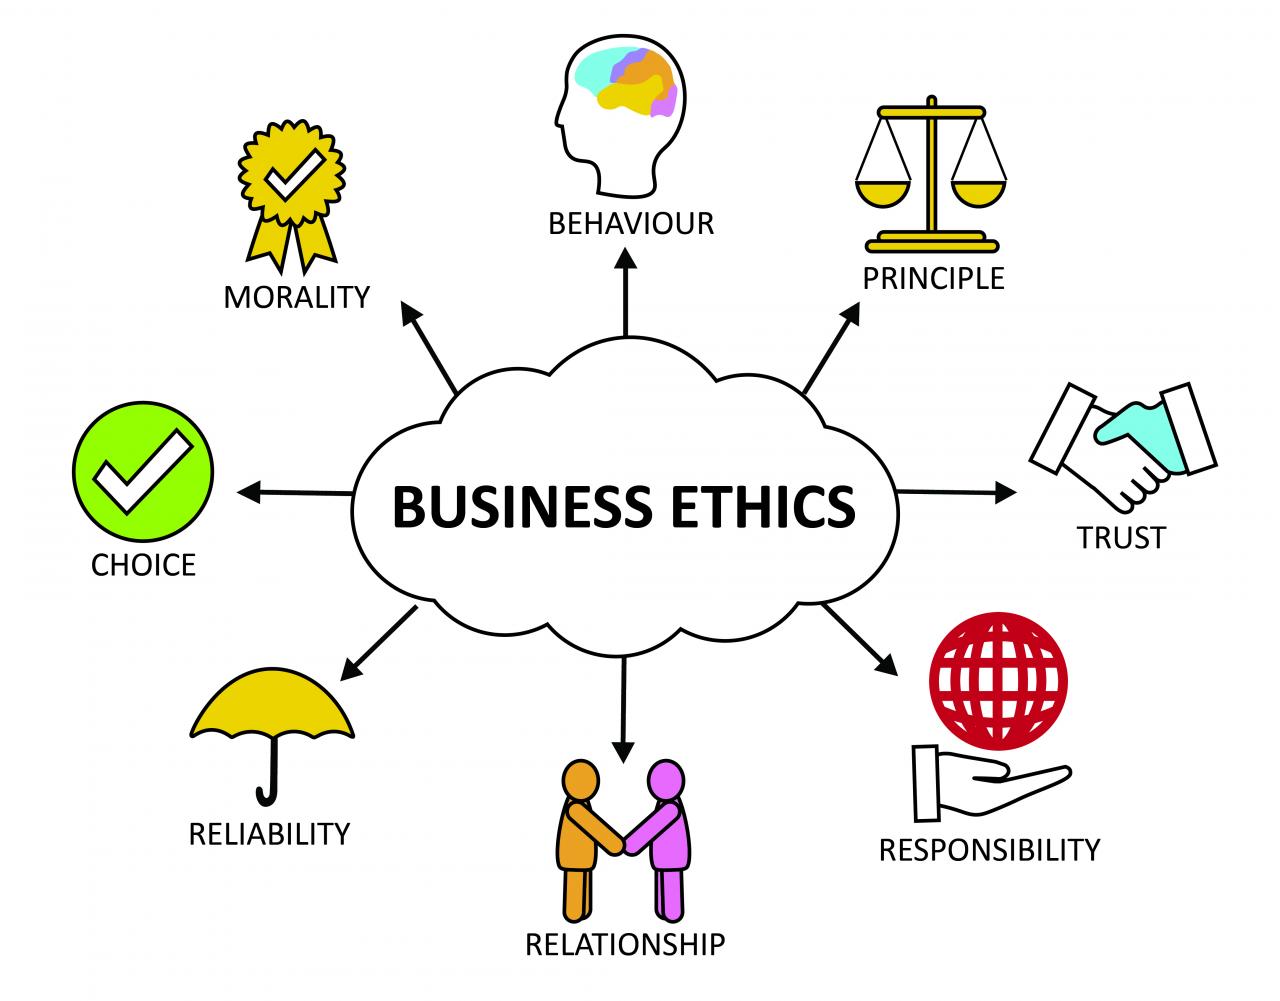 Being an ethical business in a corrupt environment